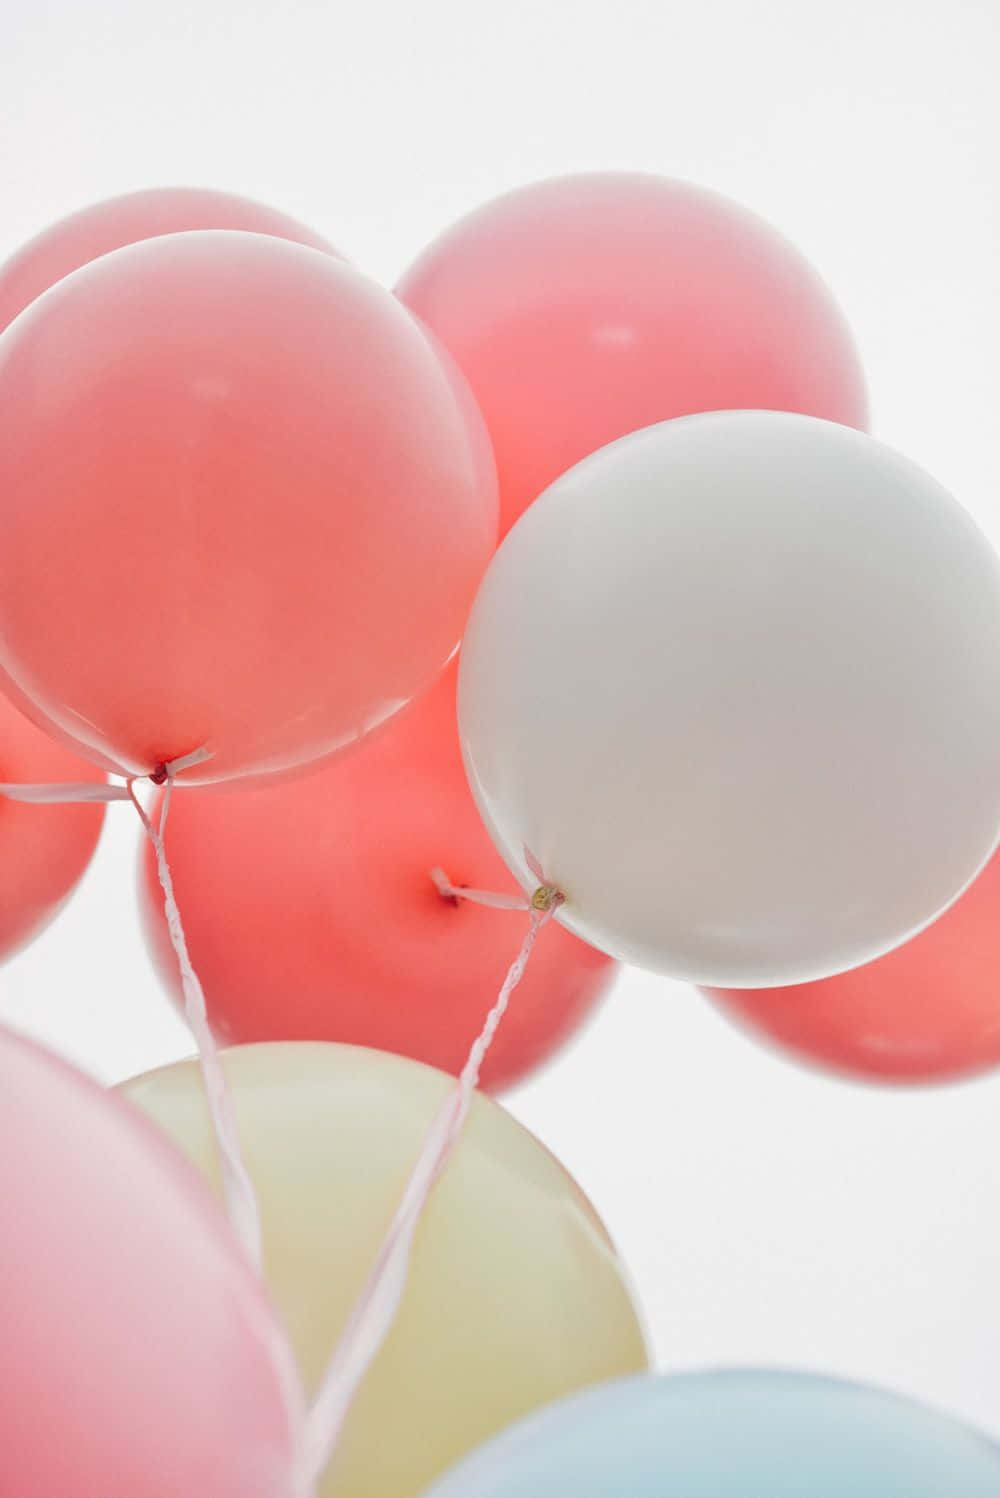 Celebrate life with a Colorful World of Pink Balloons!